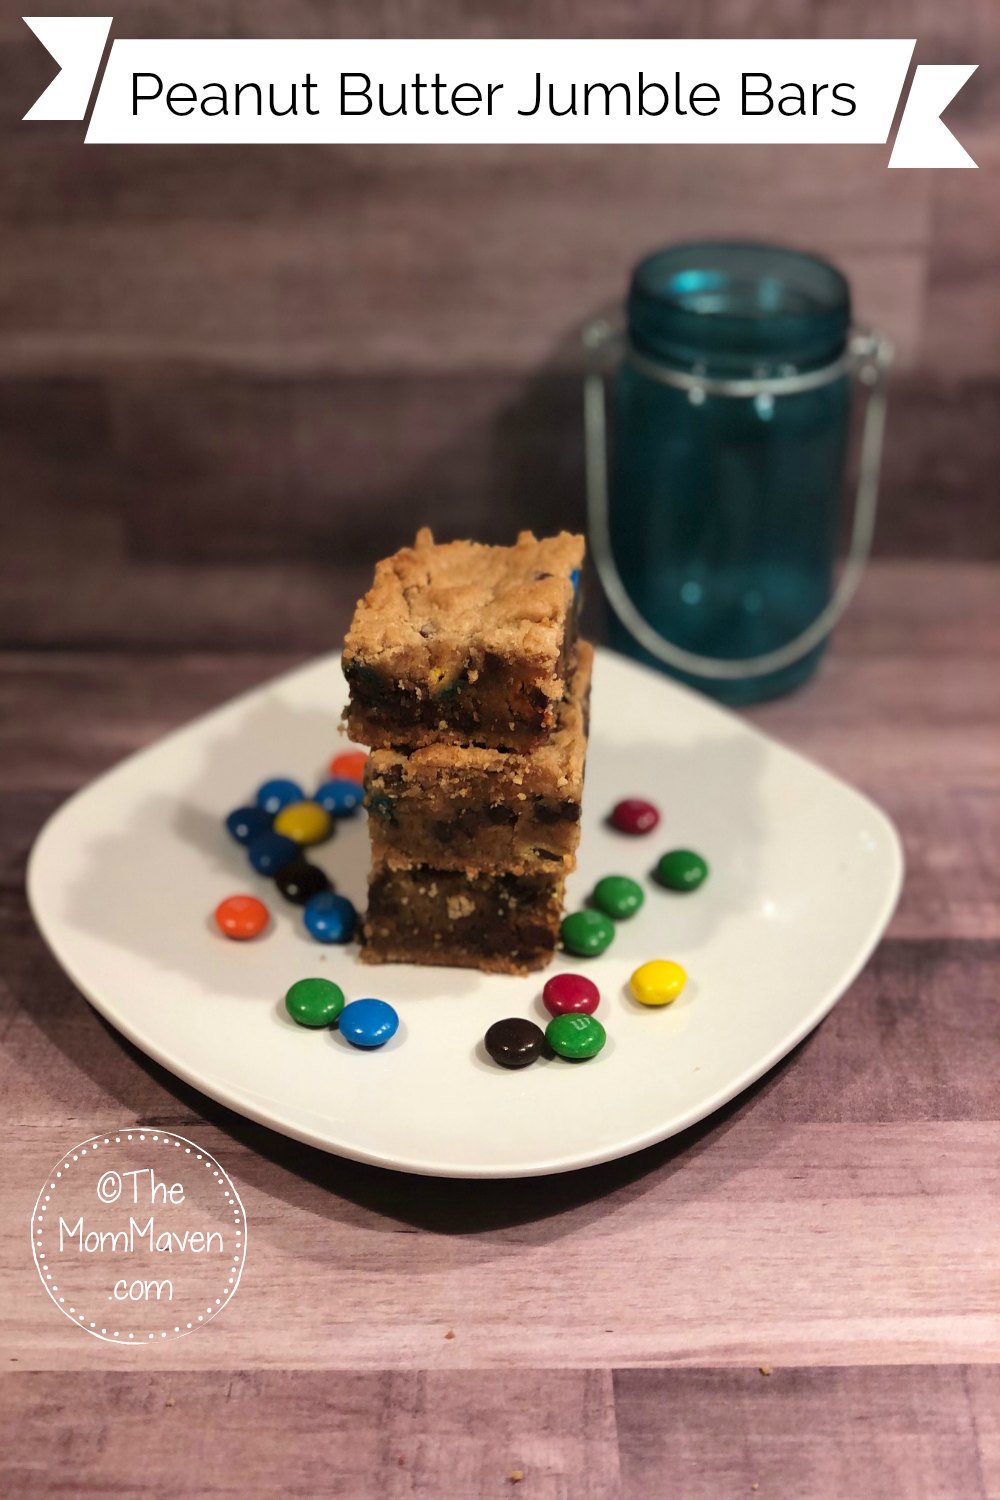 These delicious, easy to make, Peanut Butter Jumble Bars are the perfect after school or anytime treat.